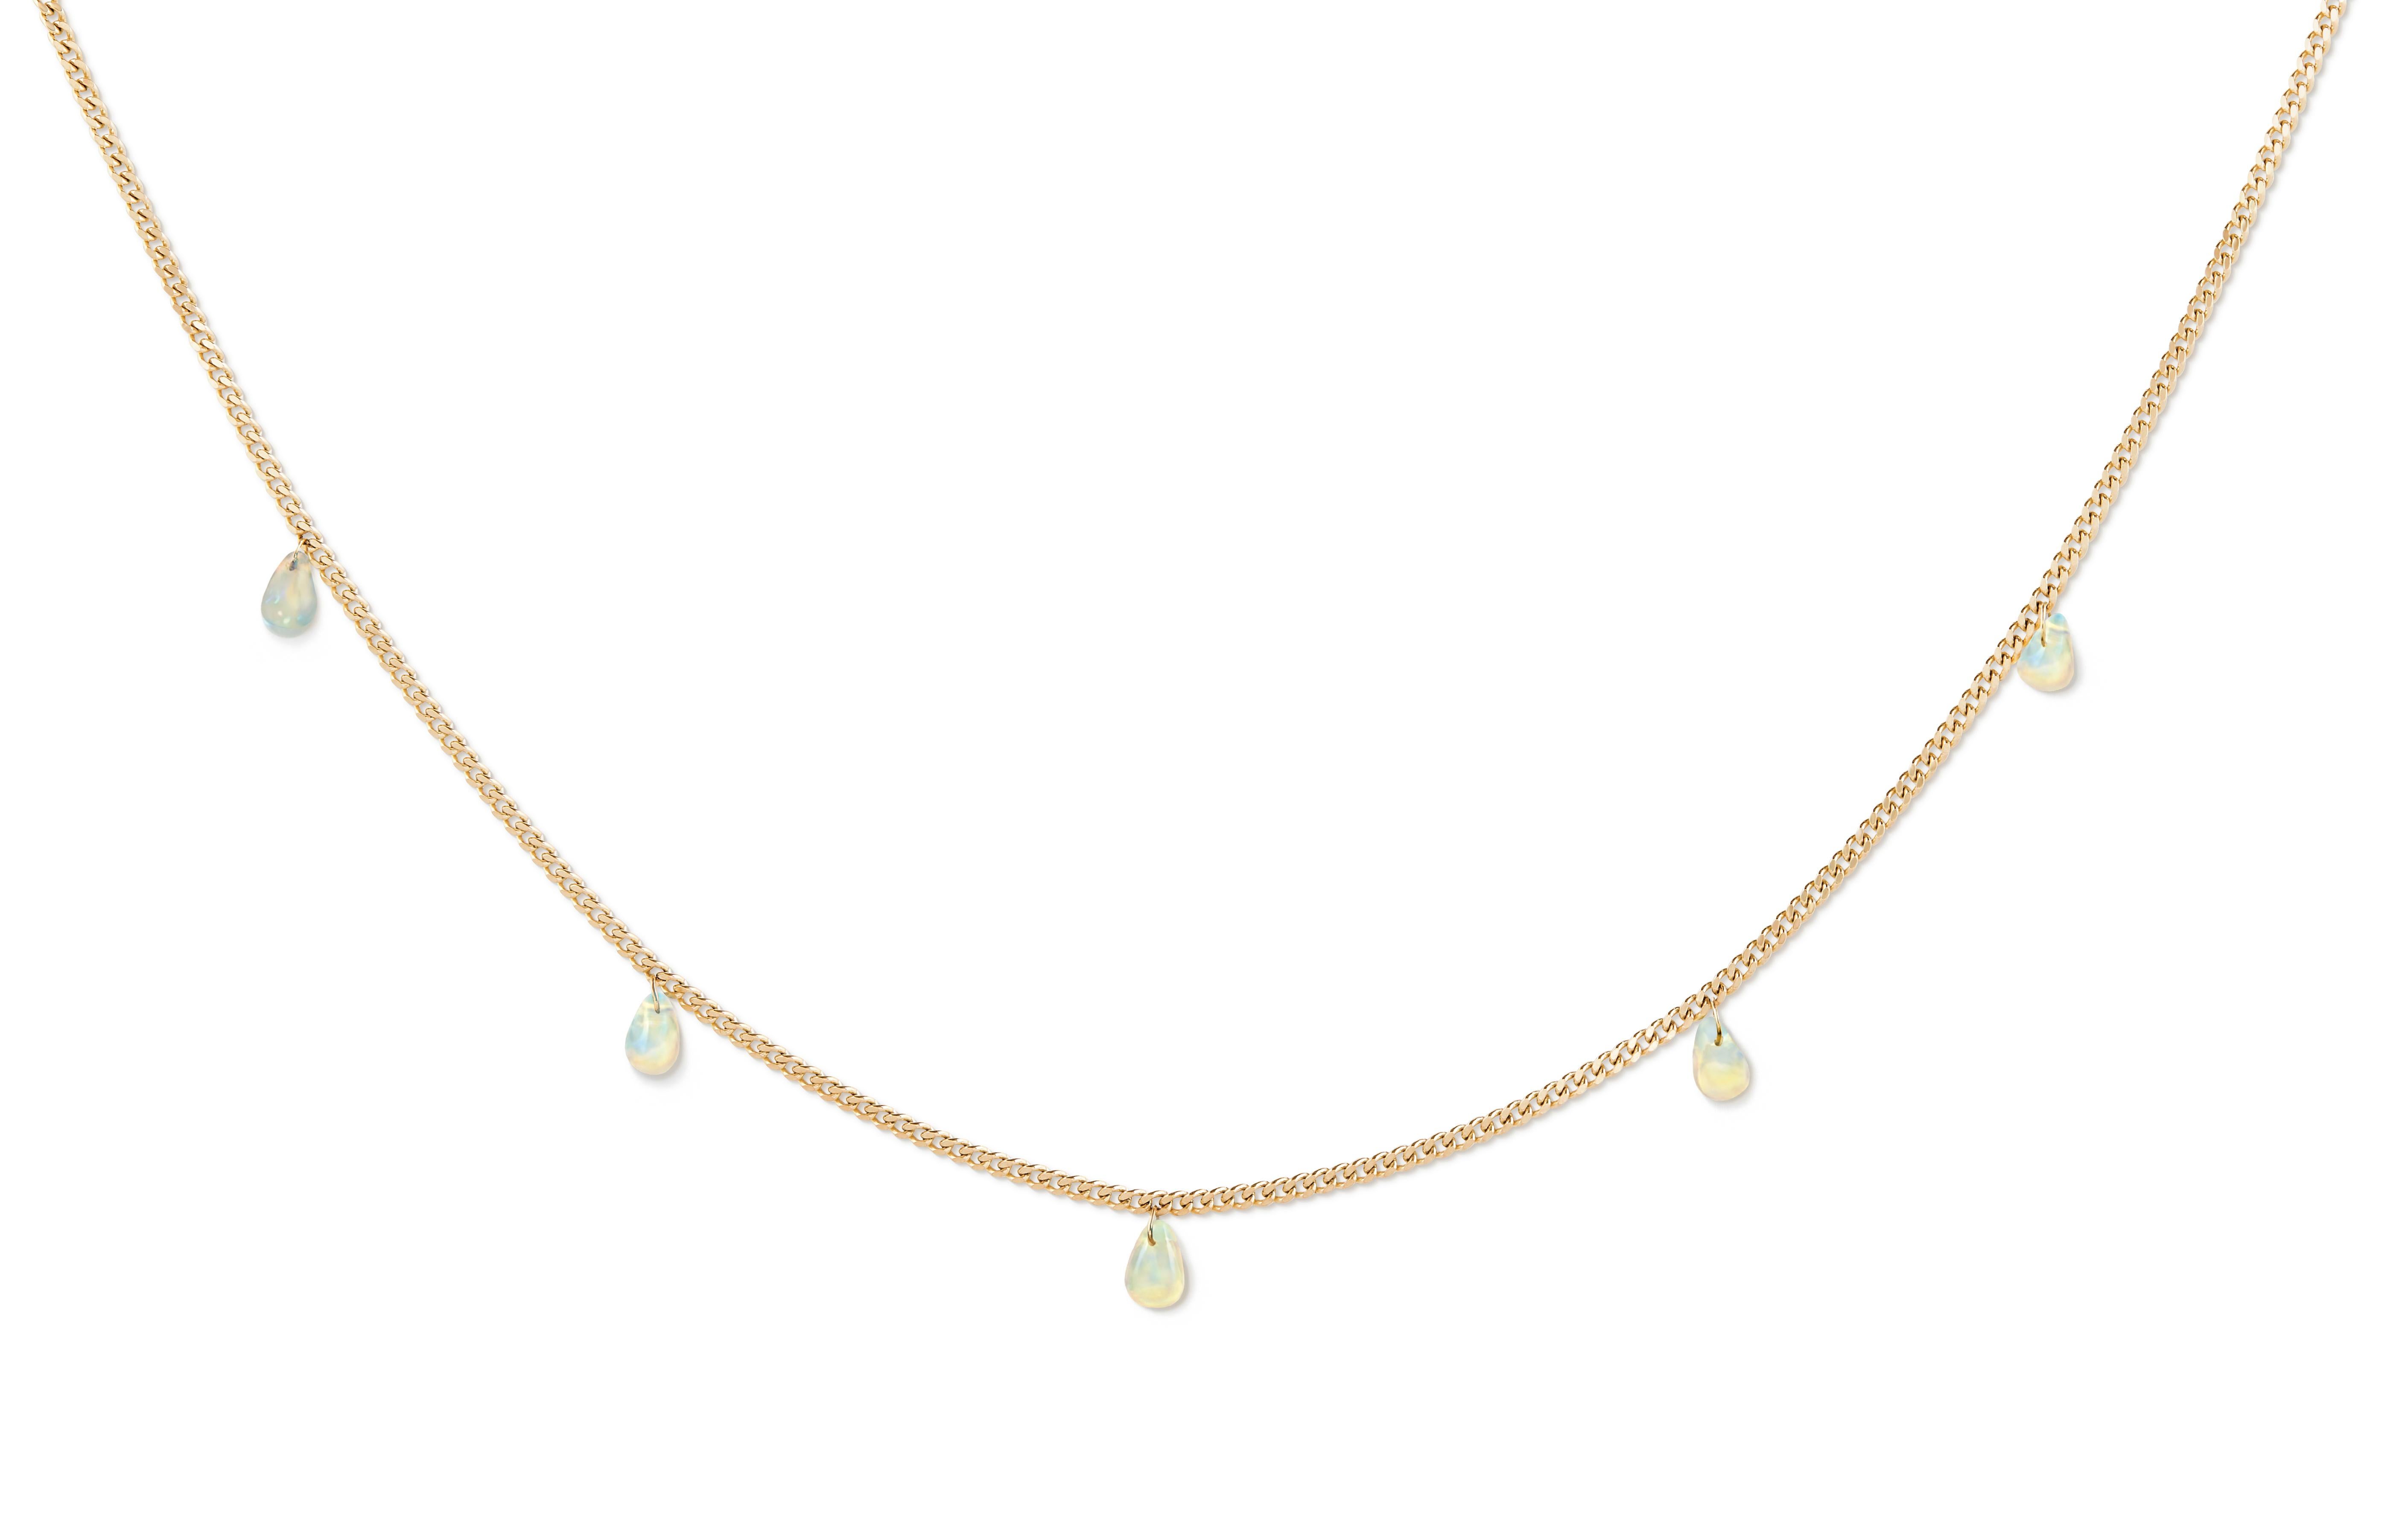 Briolette Cut Opal and Curb Chain Necklace in 18 Karat Gold For Sale